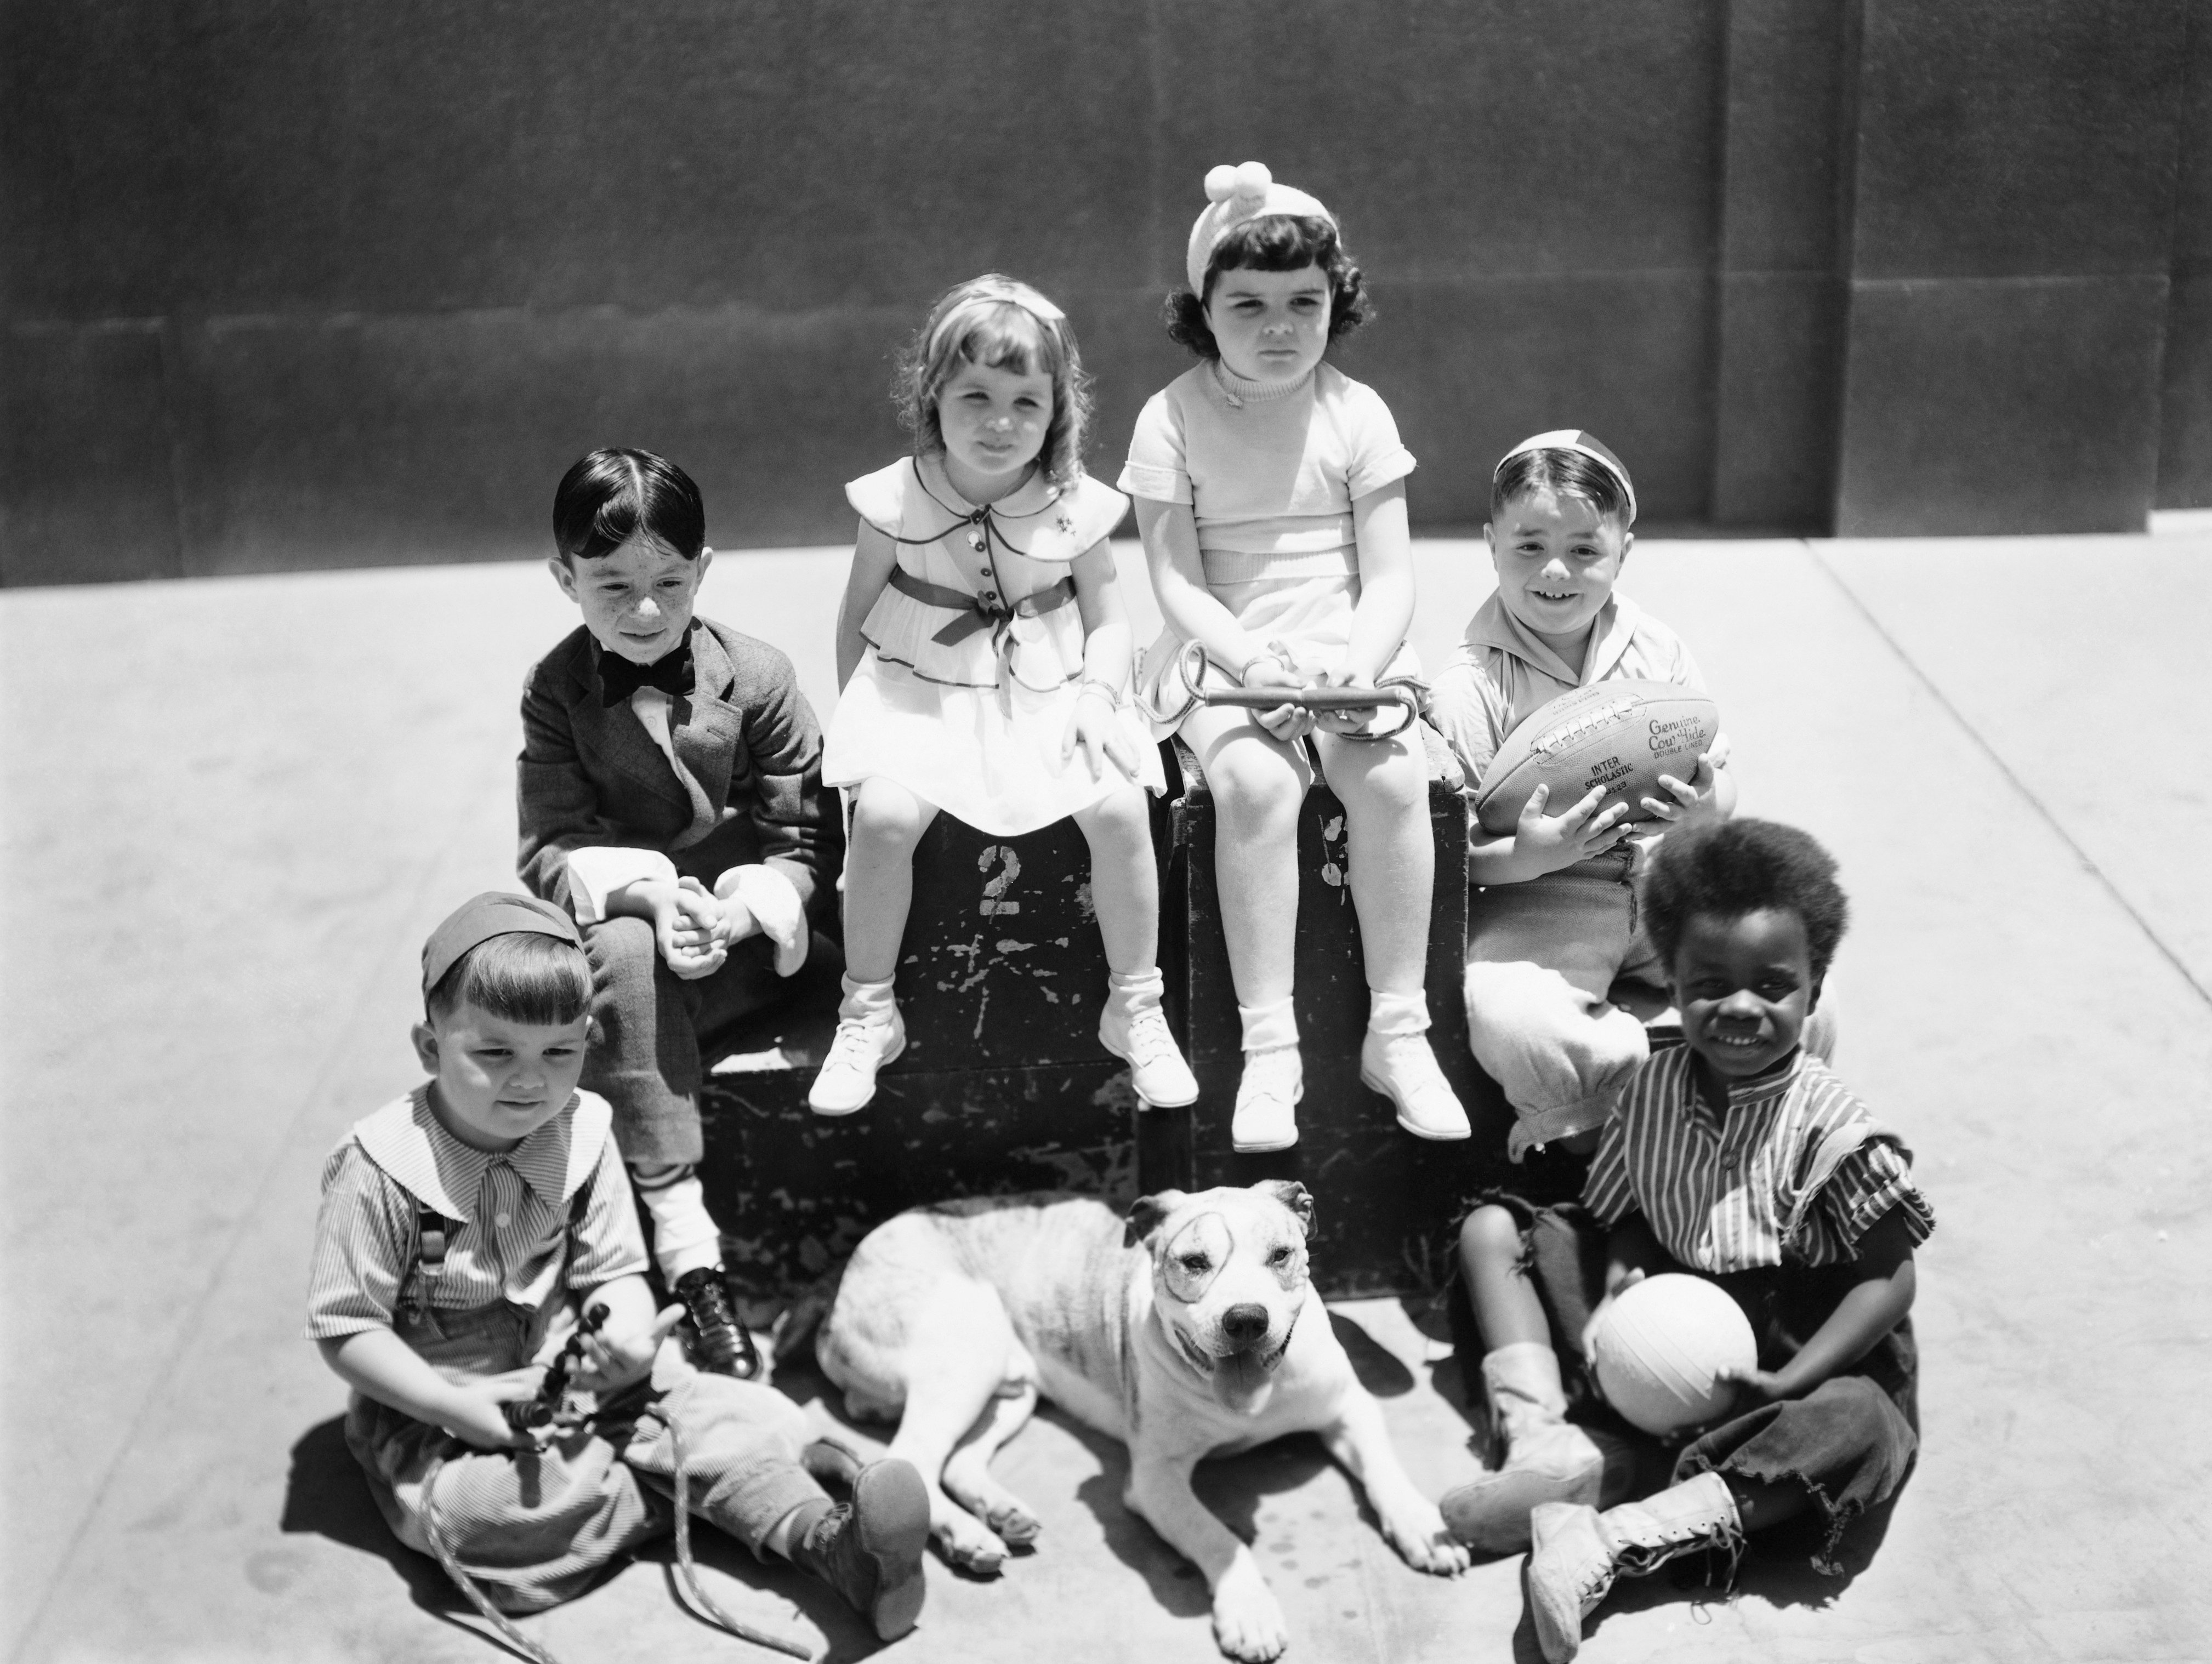 The cast of "Our Gang/Little Rascals" TV show, Hal Roach, MGM production. Spanky McFarland holding the football. | Source: Getty Images